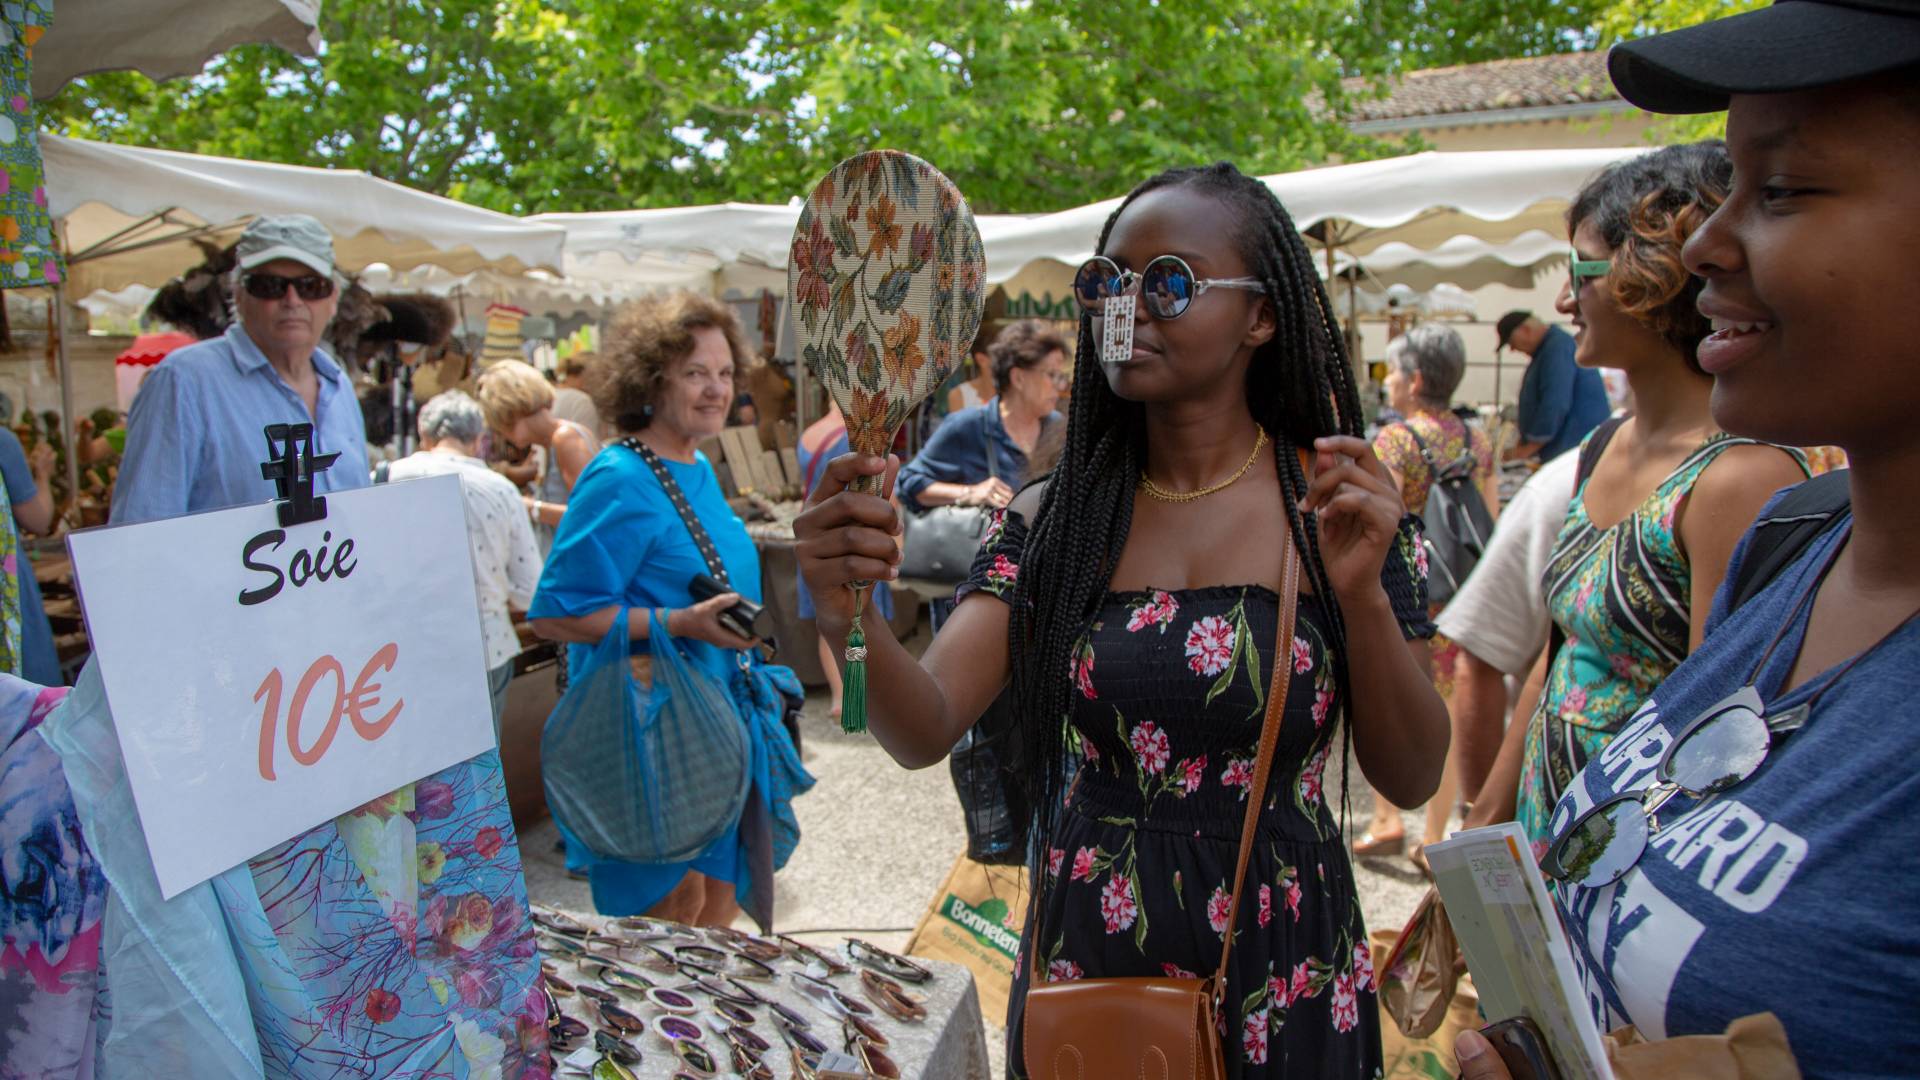 Student trying on sunglasses in outdoor market in France